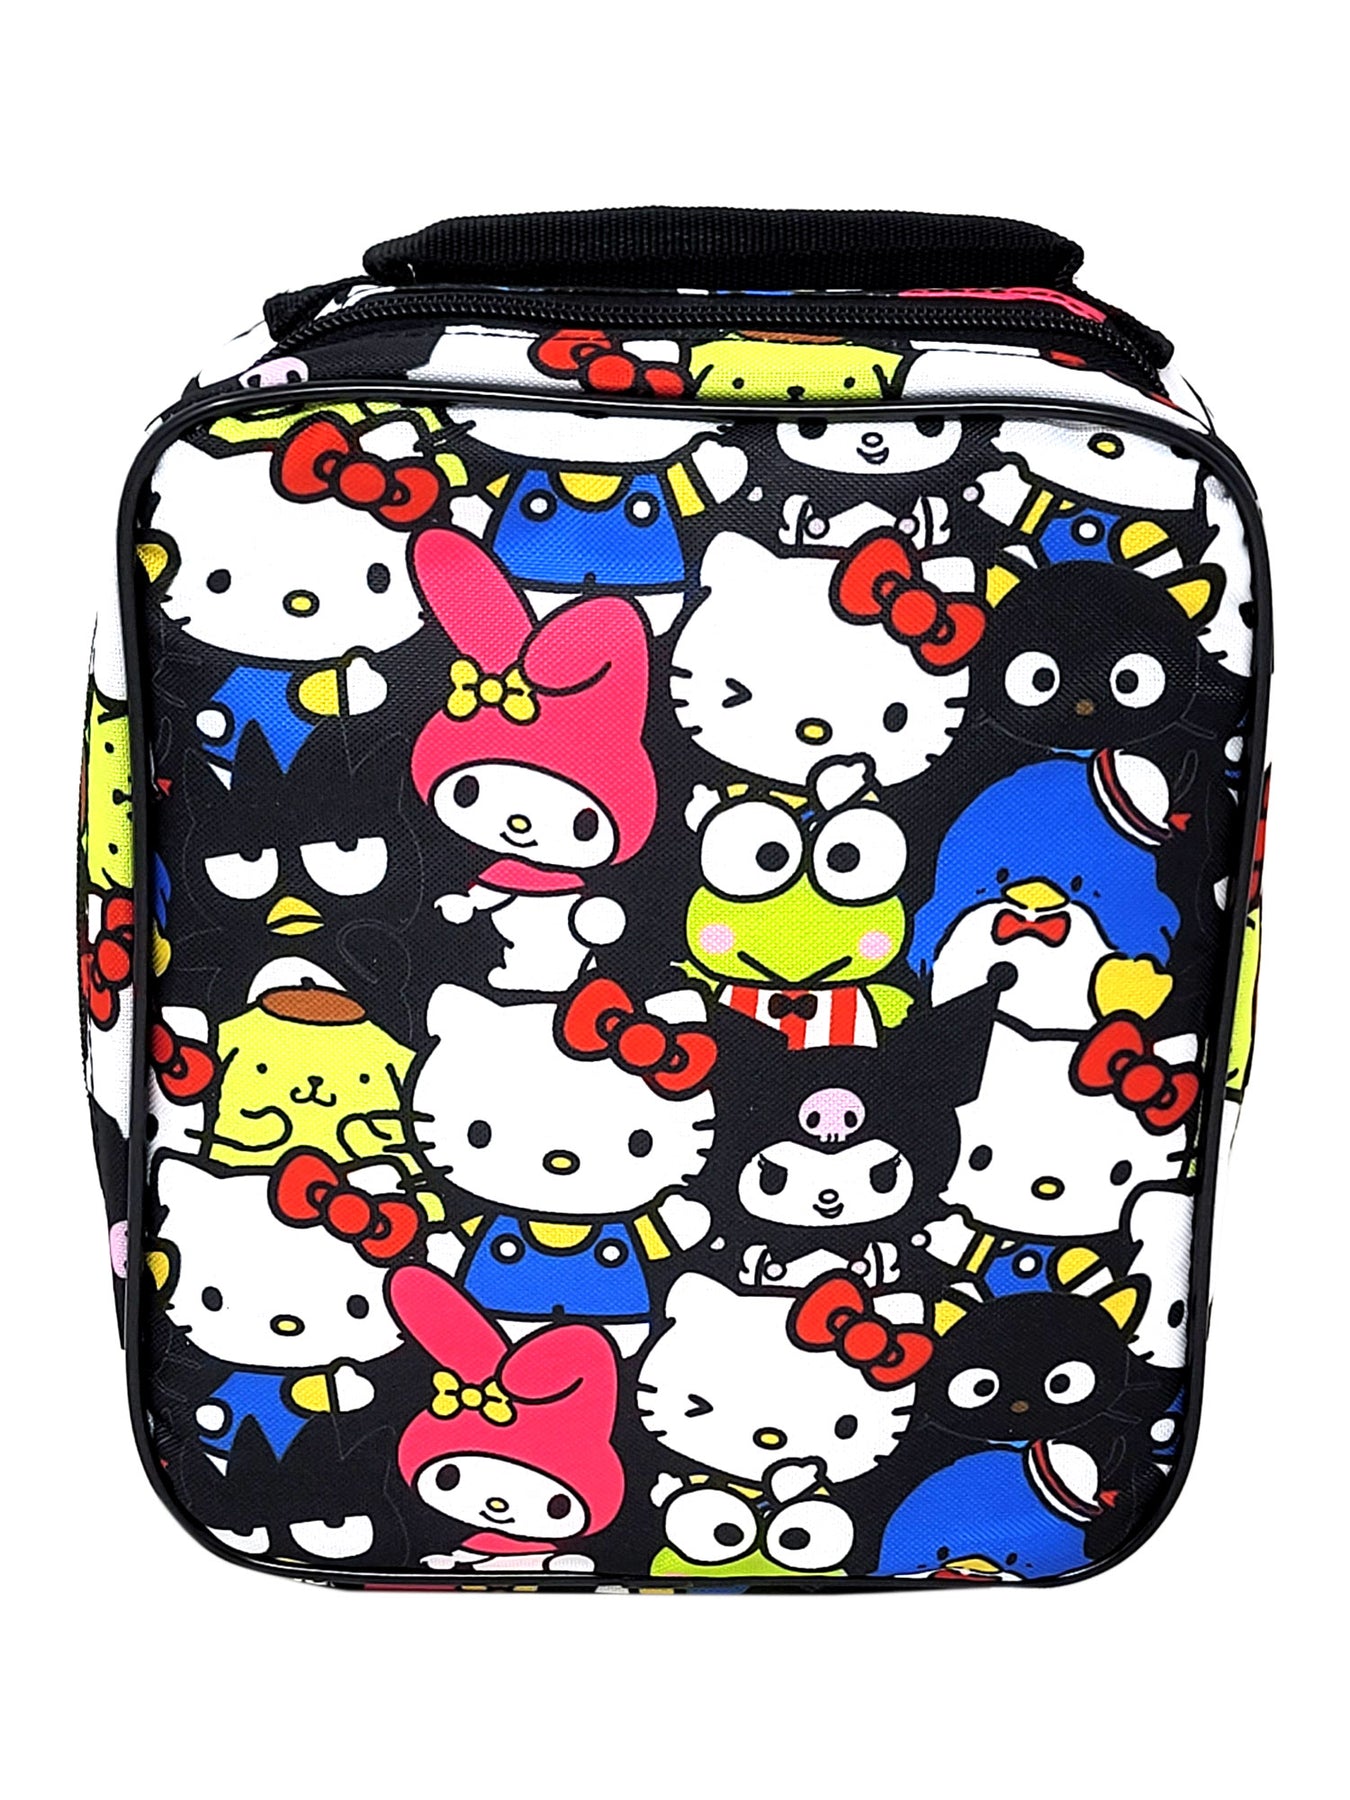 Hello Kitty Face 16 W x 10 H x 5 W Solid Pink Messenger Bag Purse-Brand  New!